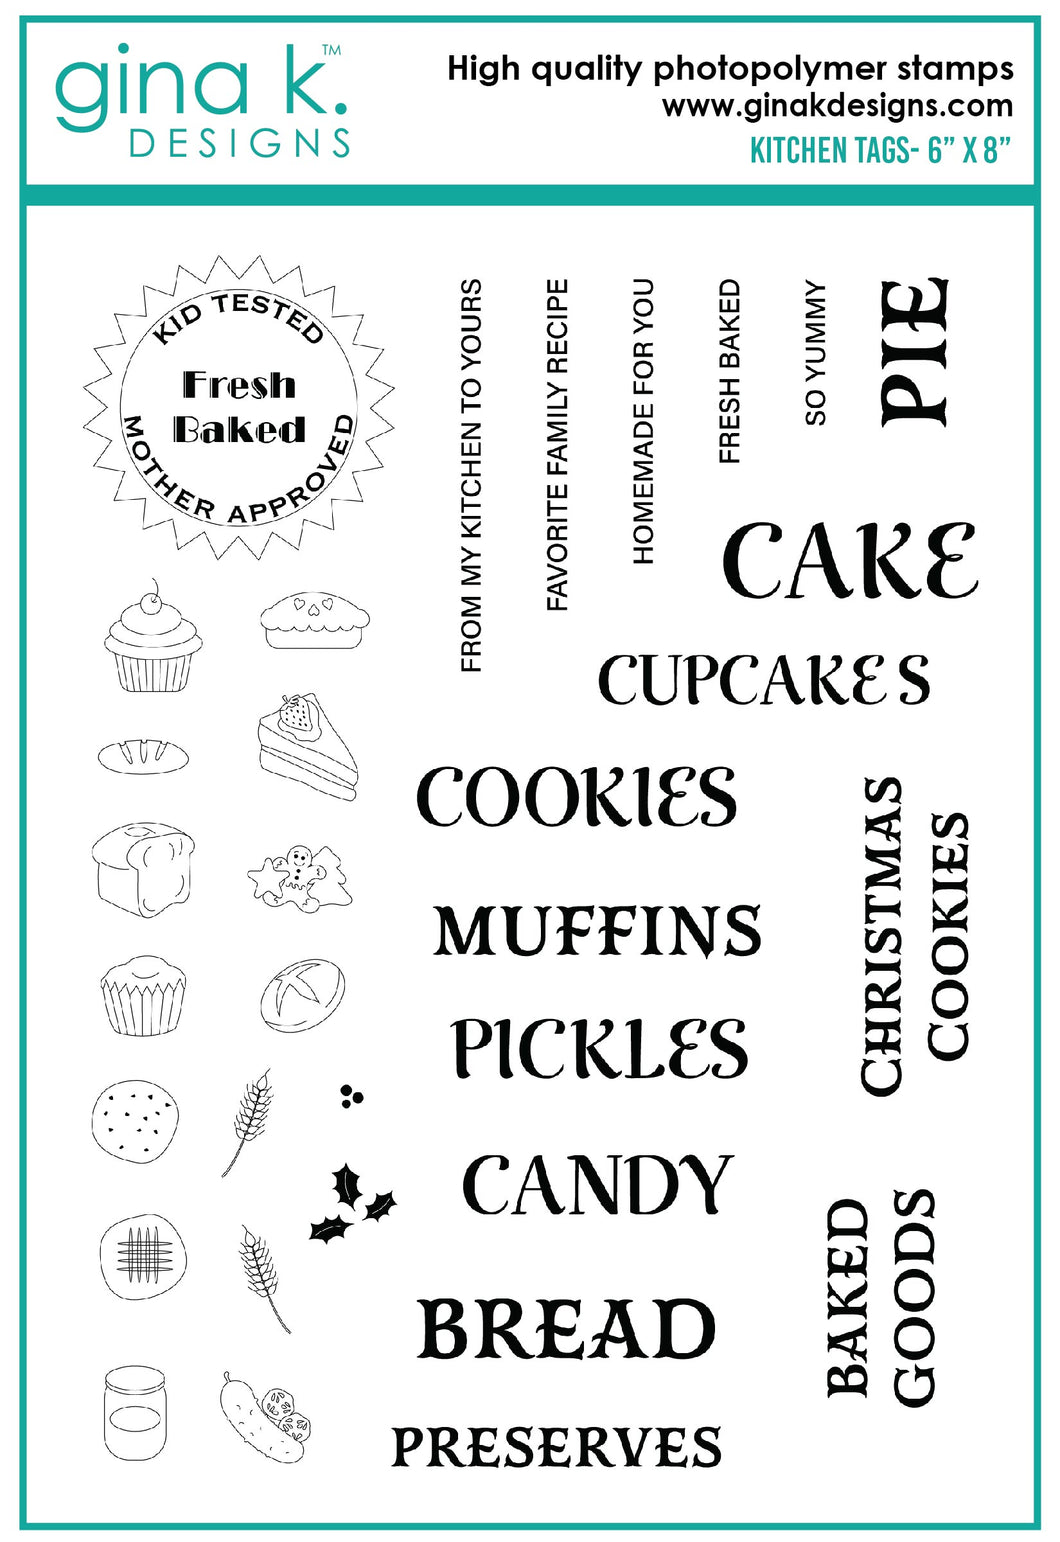 Gina K. Designs - Stamps - Kitchen Tags. Kitchen Tags is a stamp set by Debrah Warner. This set is made of premium clear photopolymer and measures 6